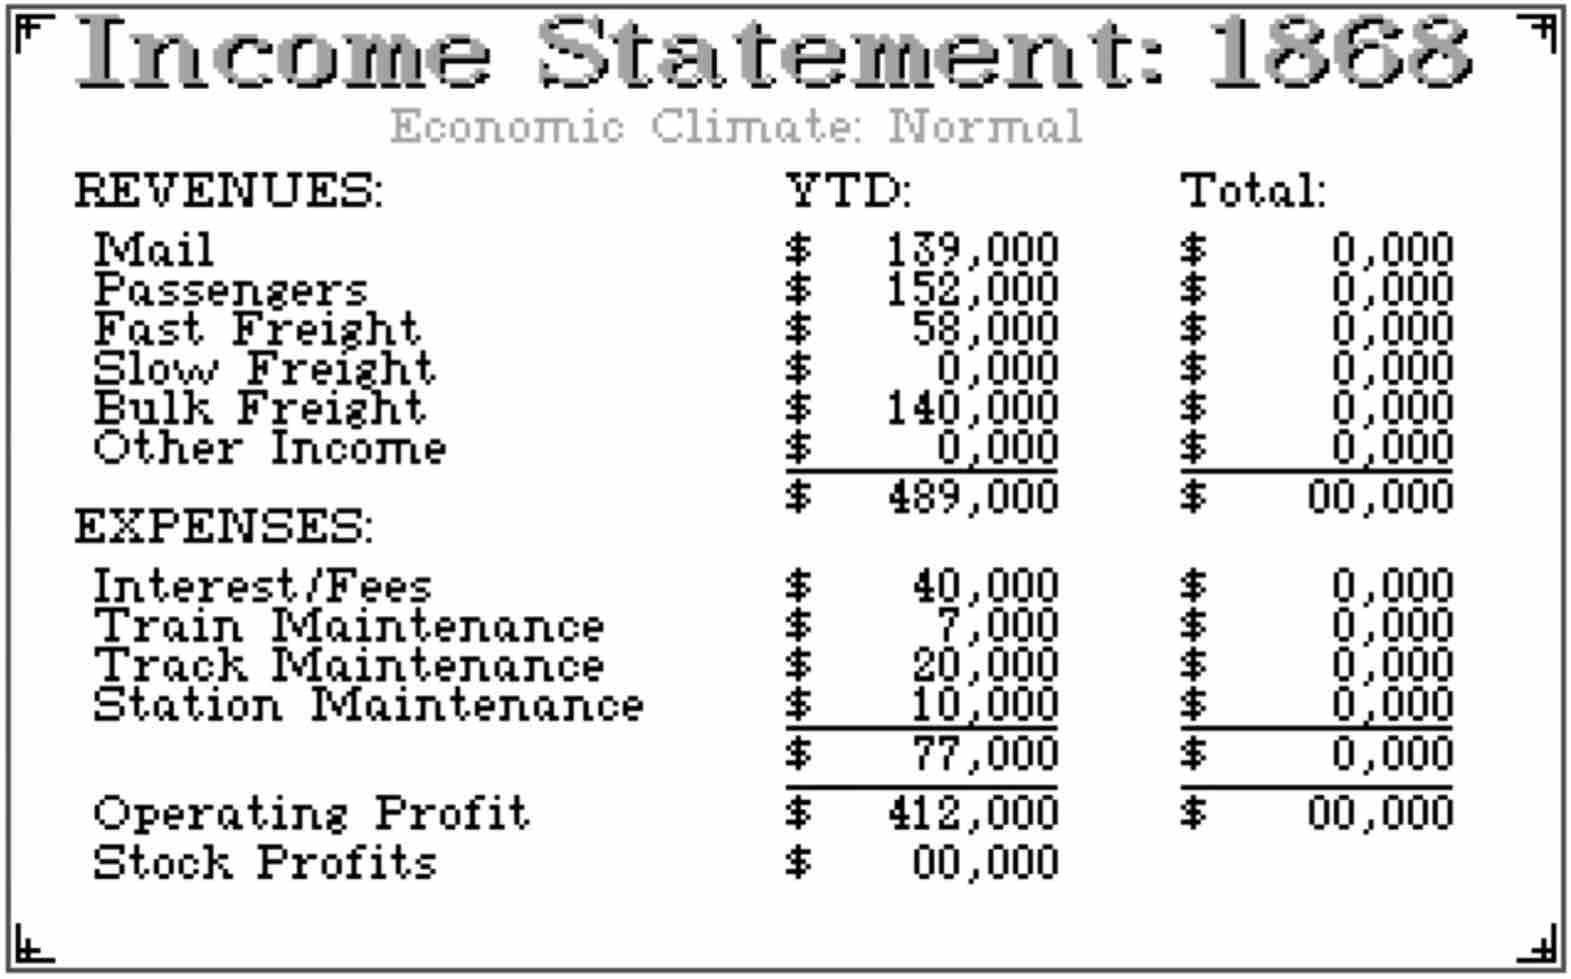 Railroad Tycoon's Income Statement taught me how to understand revenue and expenses.